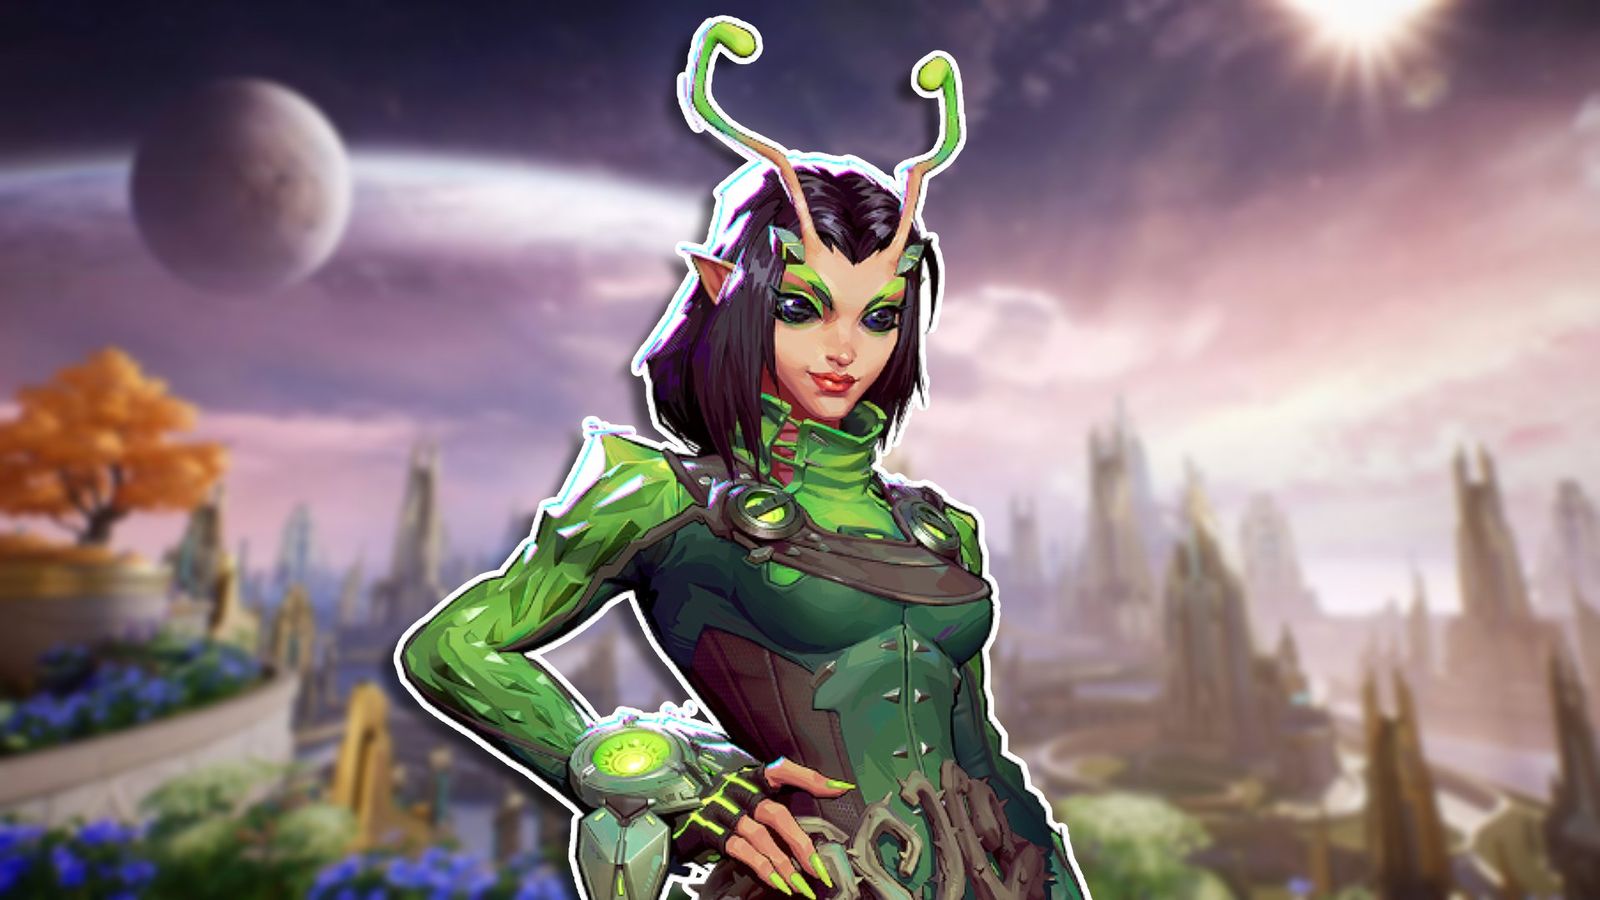 Marvel Rivals' Mantis posing with her right hand on her hip while smiling slightly. In the background is a slightly blurred image of the Asgard map.